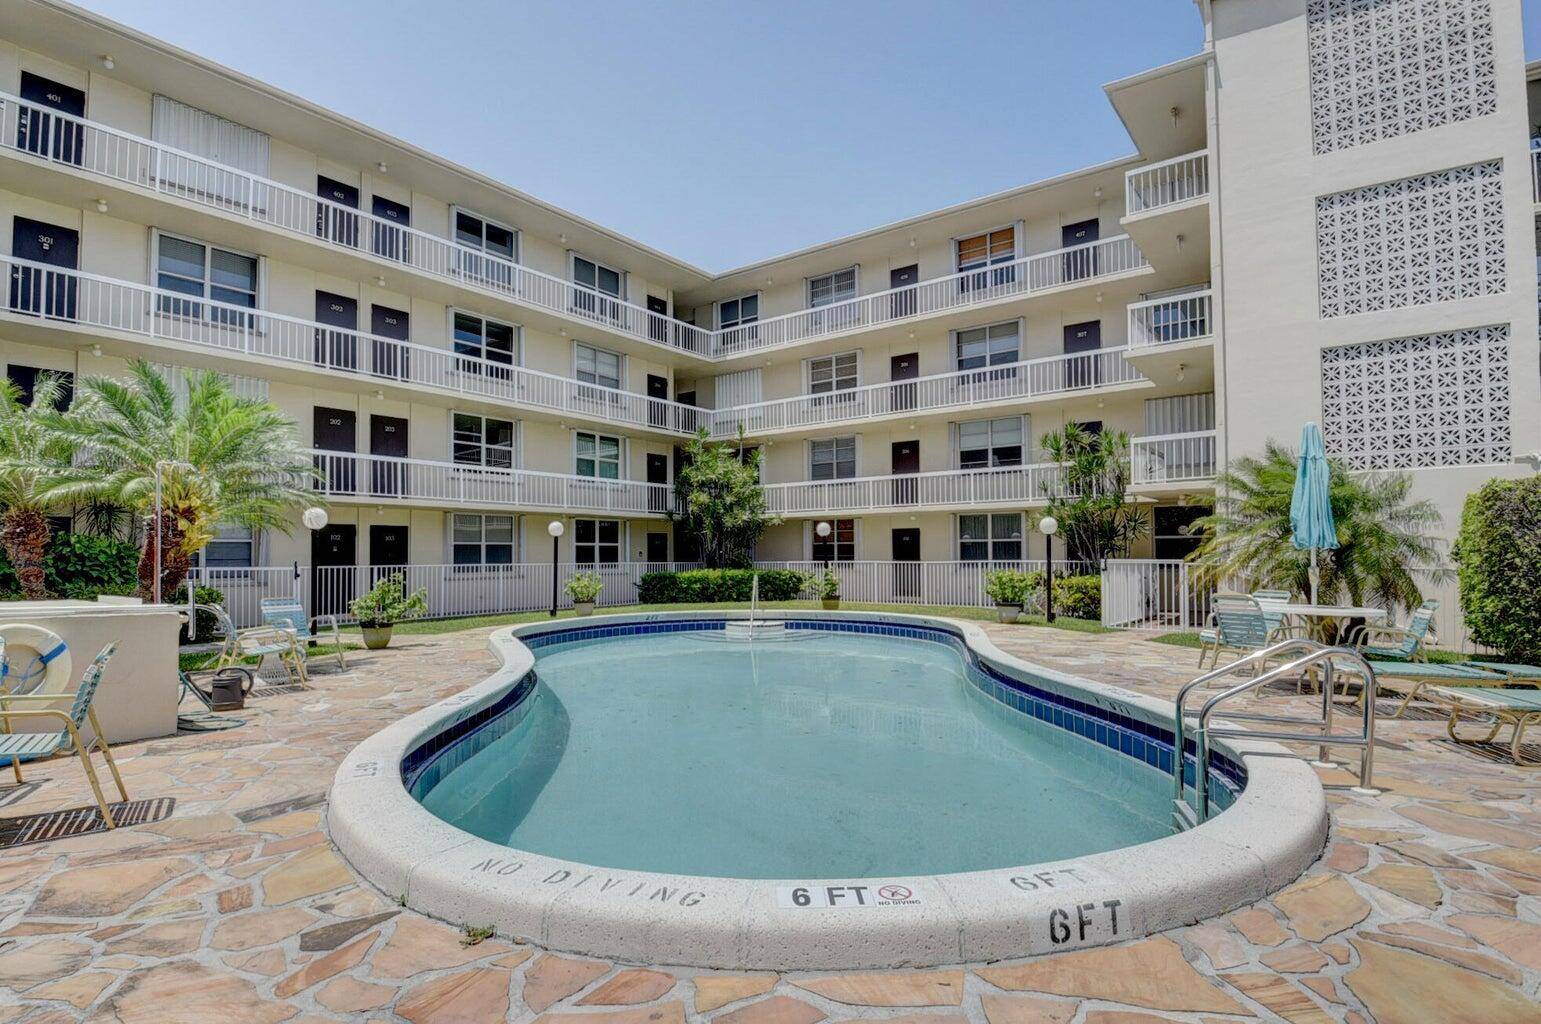 Discover the essence of South Florida living with this centrally located 1 bedroom condo in East Boynton.